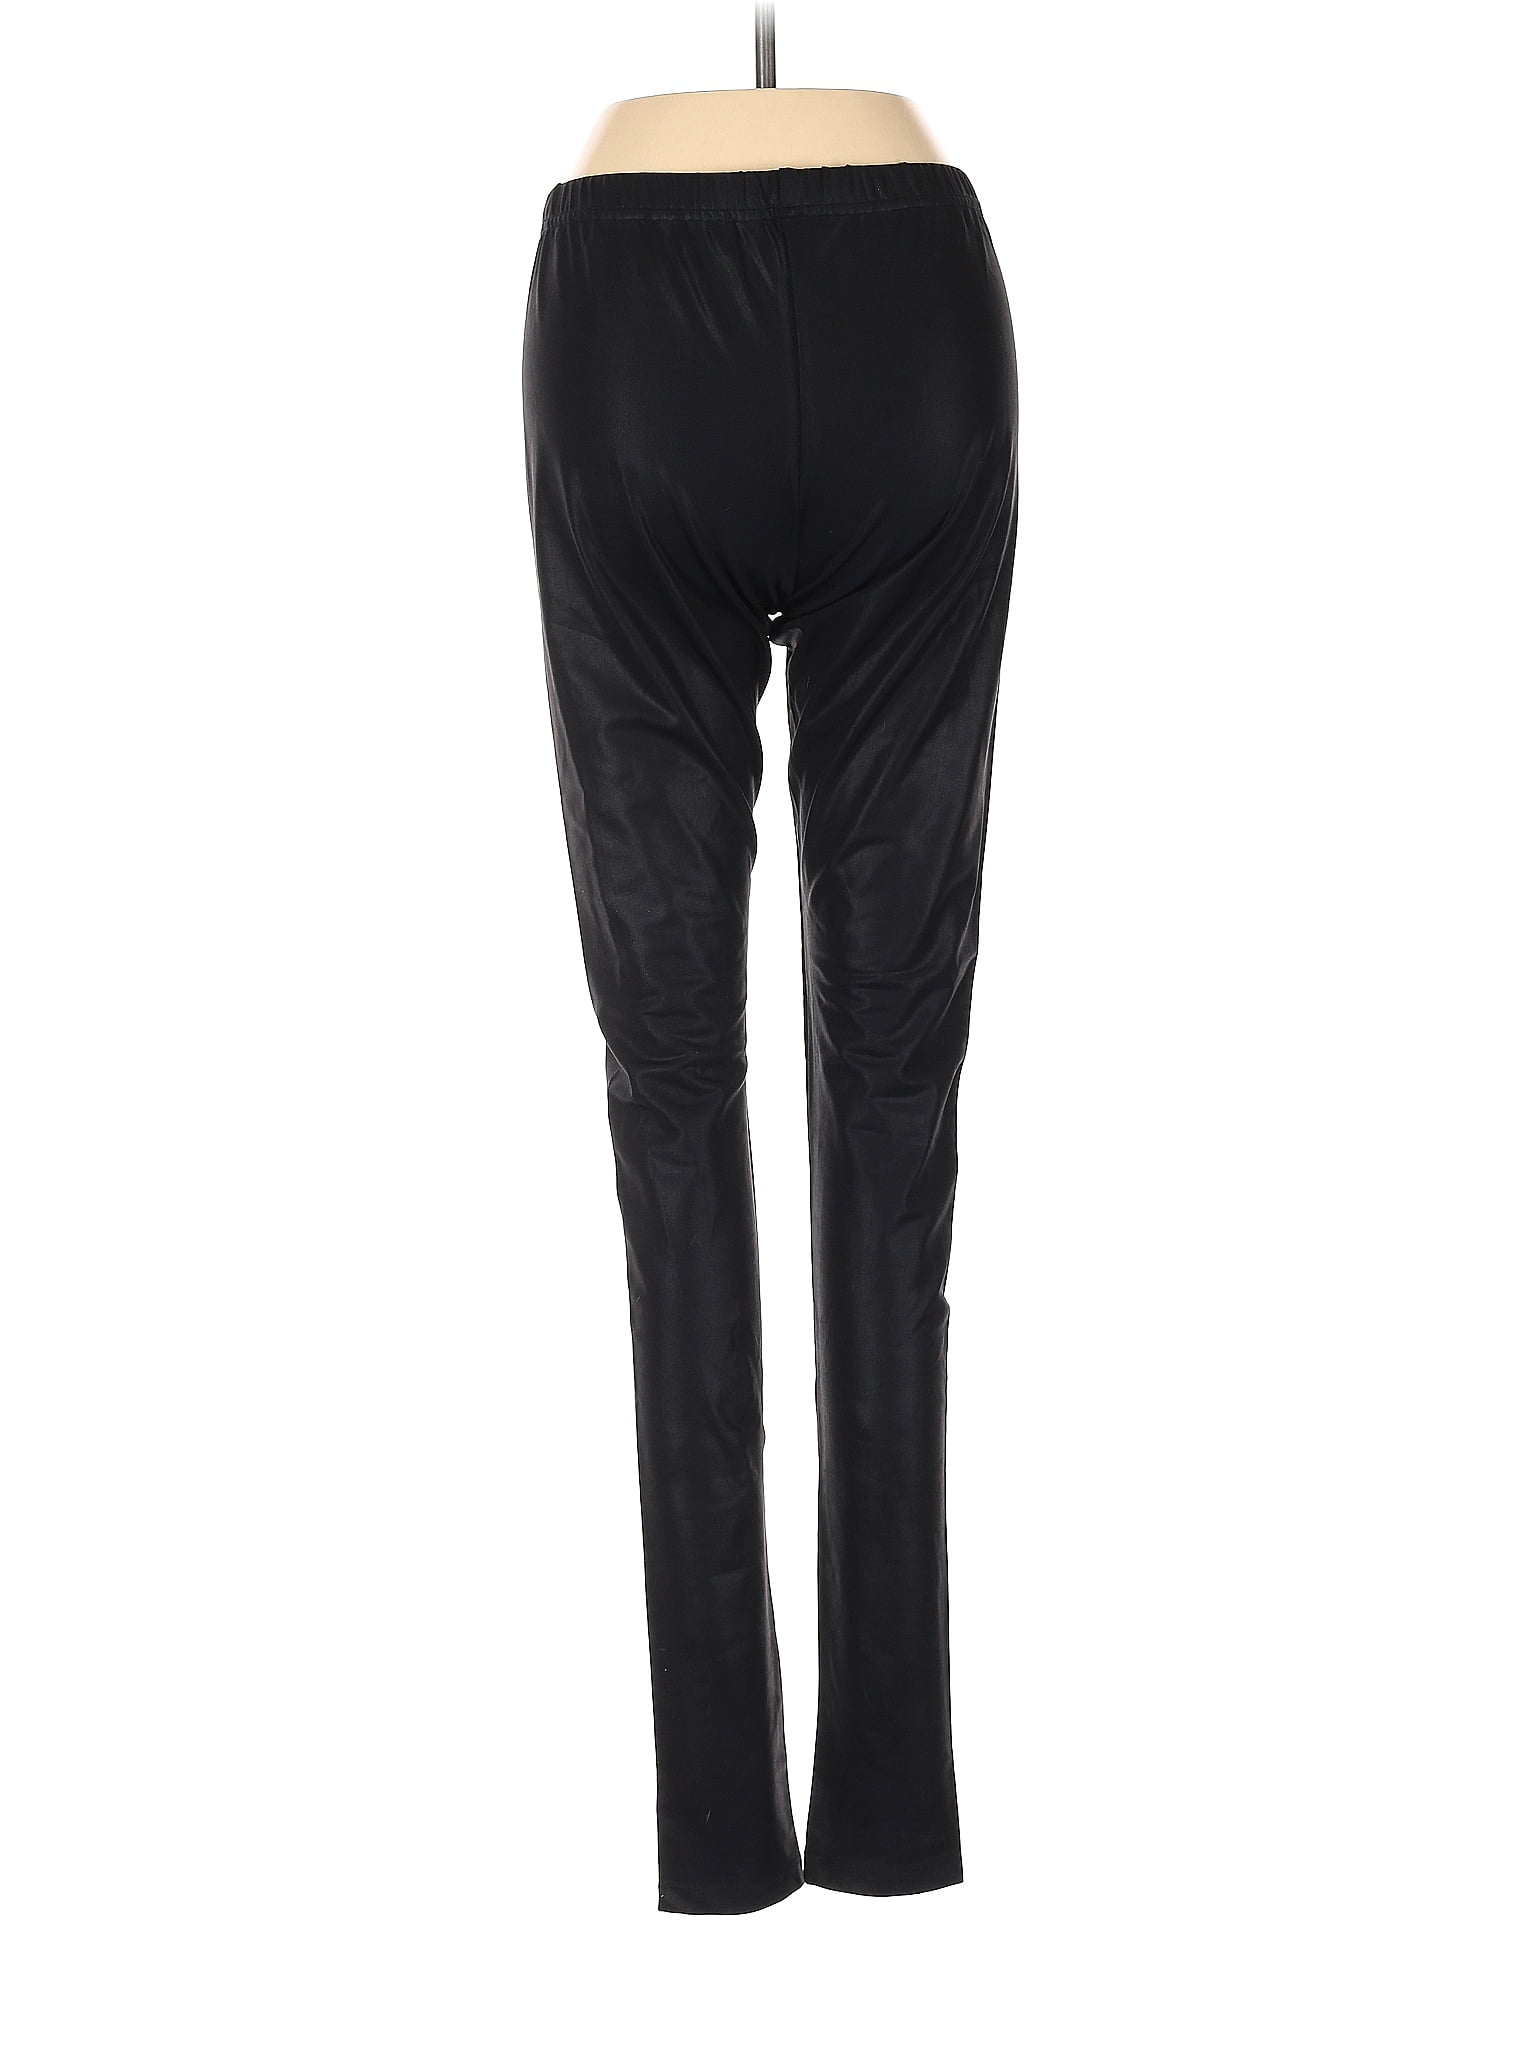 SPANX Solid Black Leggings Size XL - 59% off